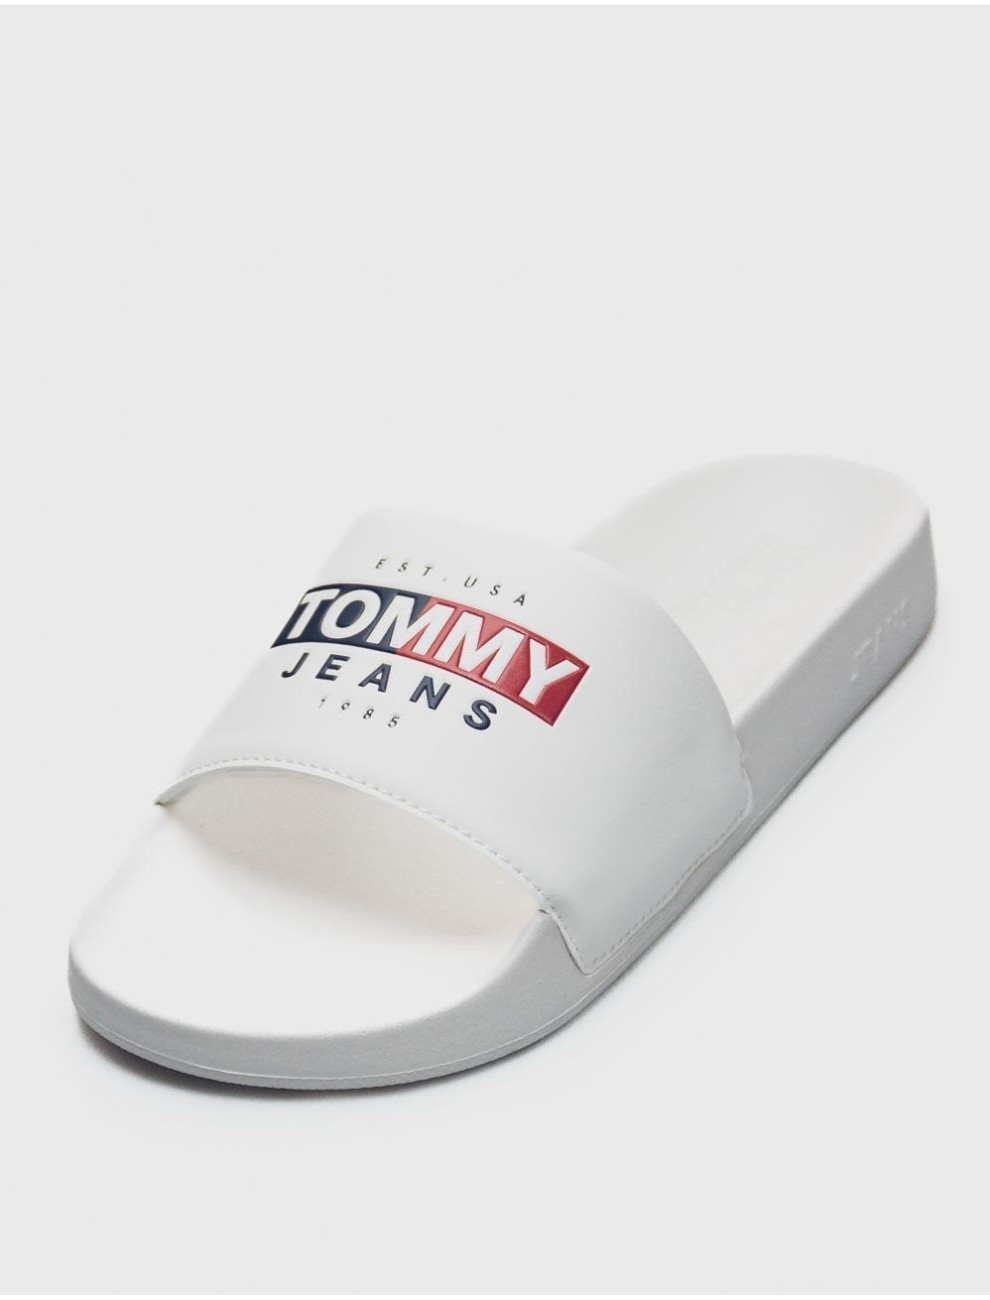 Chanclas Tommy Hilfiger Tommy S Blanco |